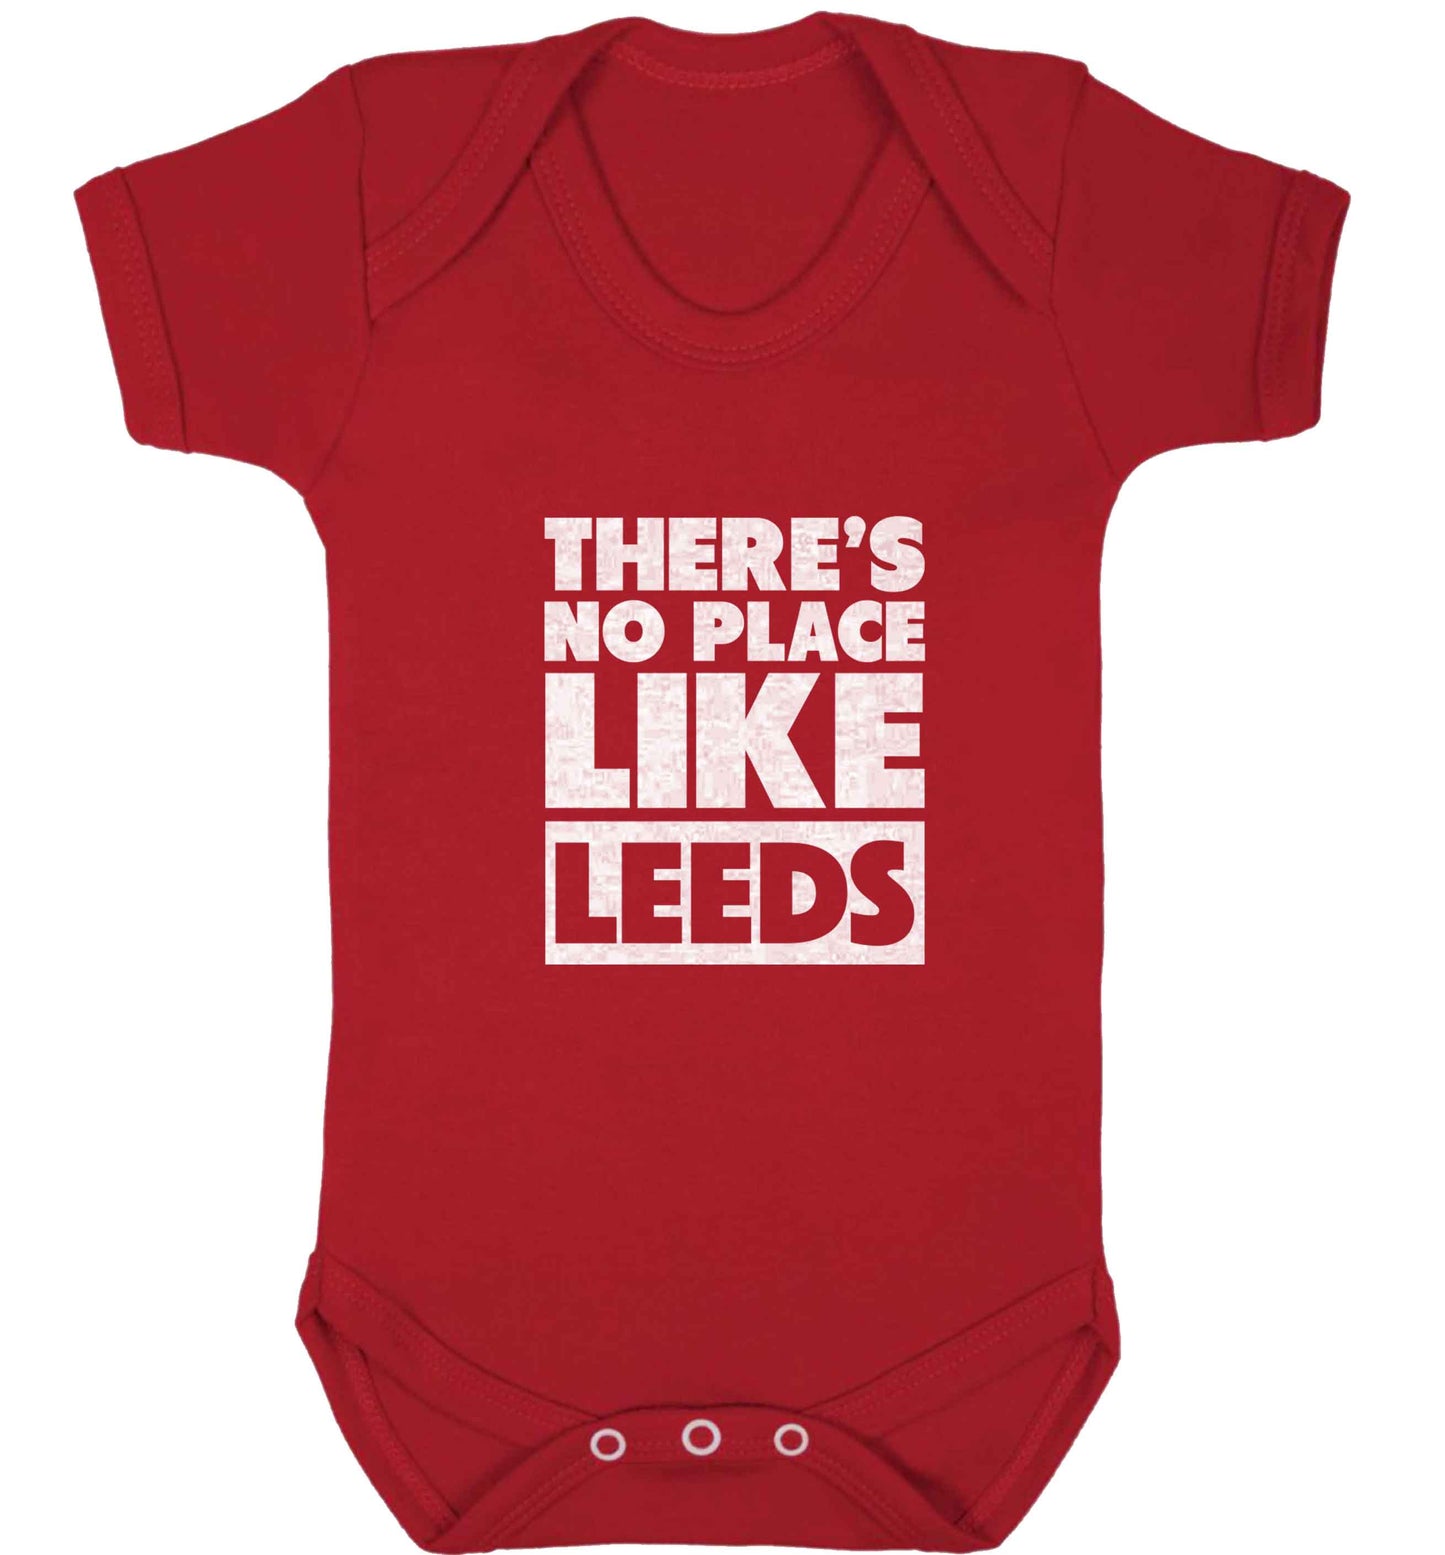 There's no place like Leeds baby vest red 18-24 months